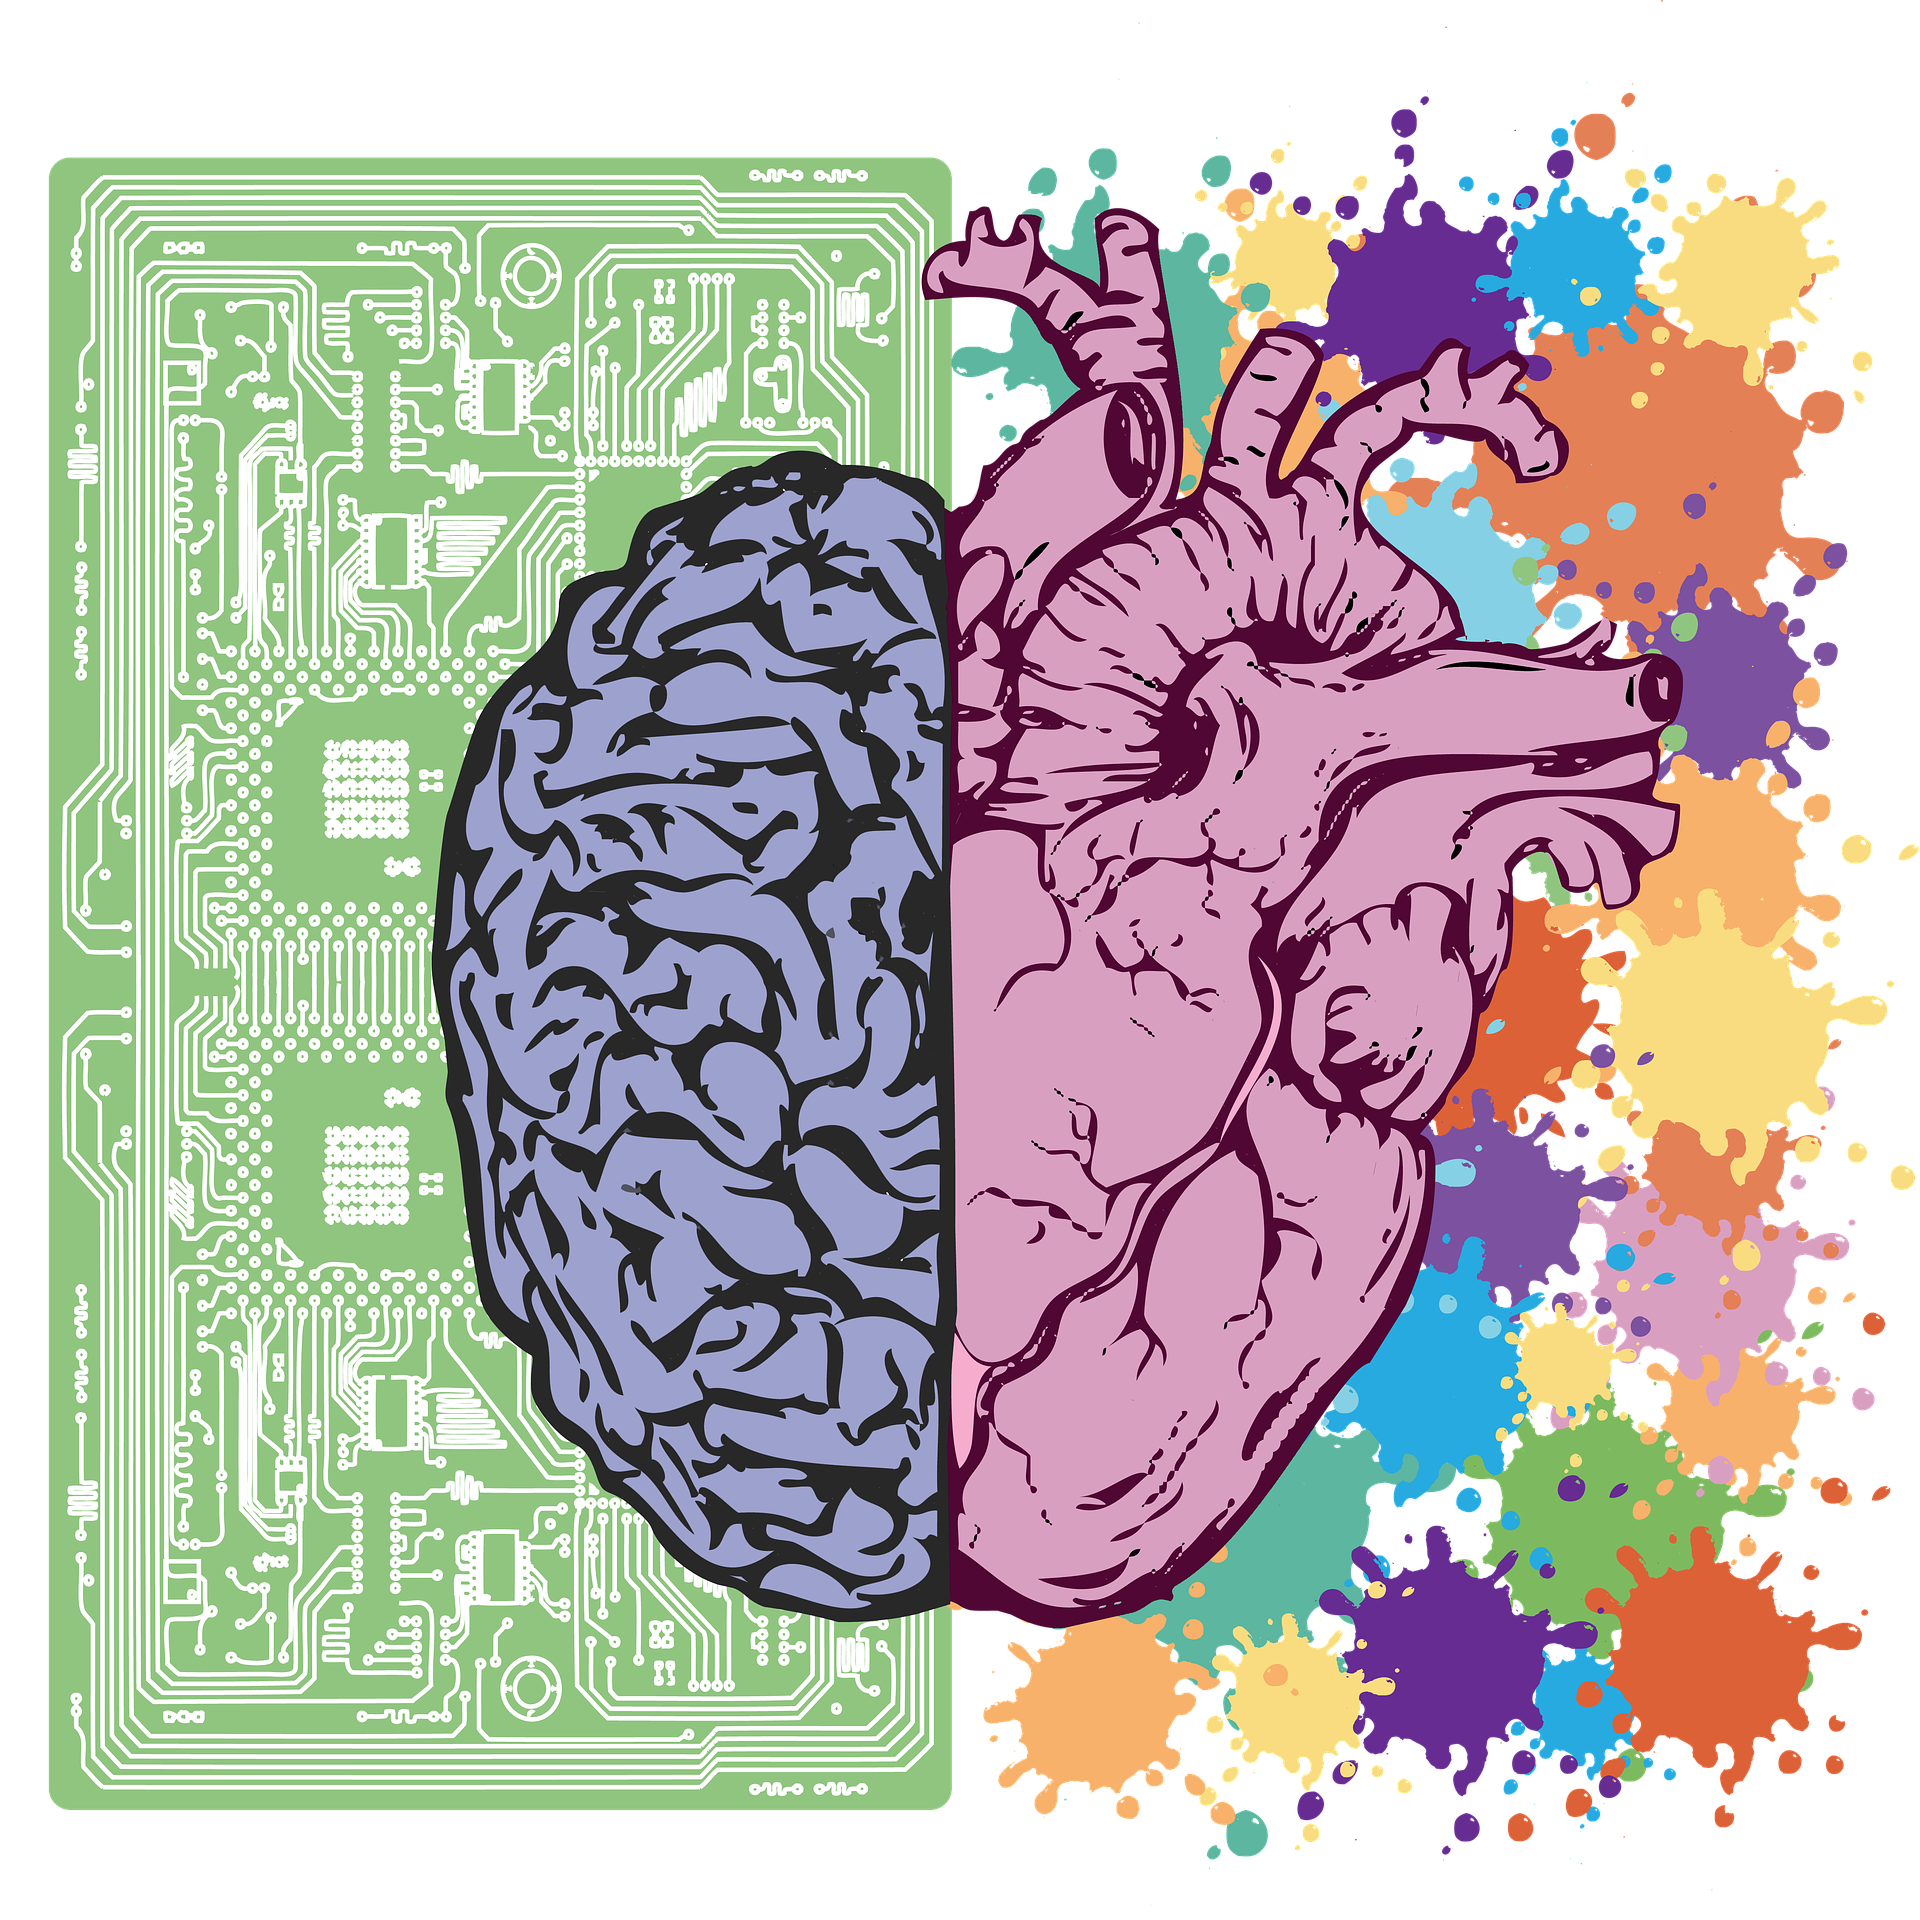 The right and left hemispheres of the brain with each side a different color.  The left side is drawn against the background of a computer chip and the right against a background of splashes of different bright colors.